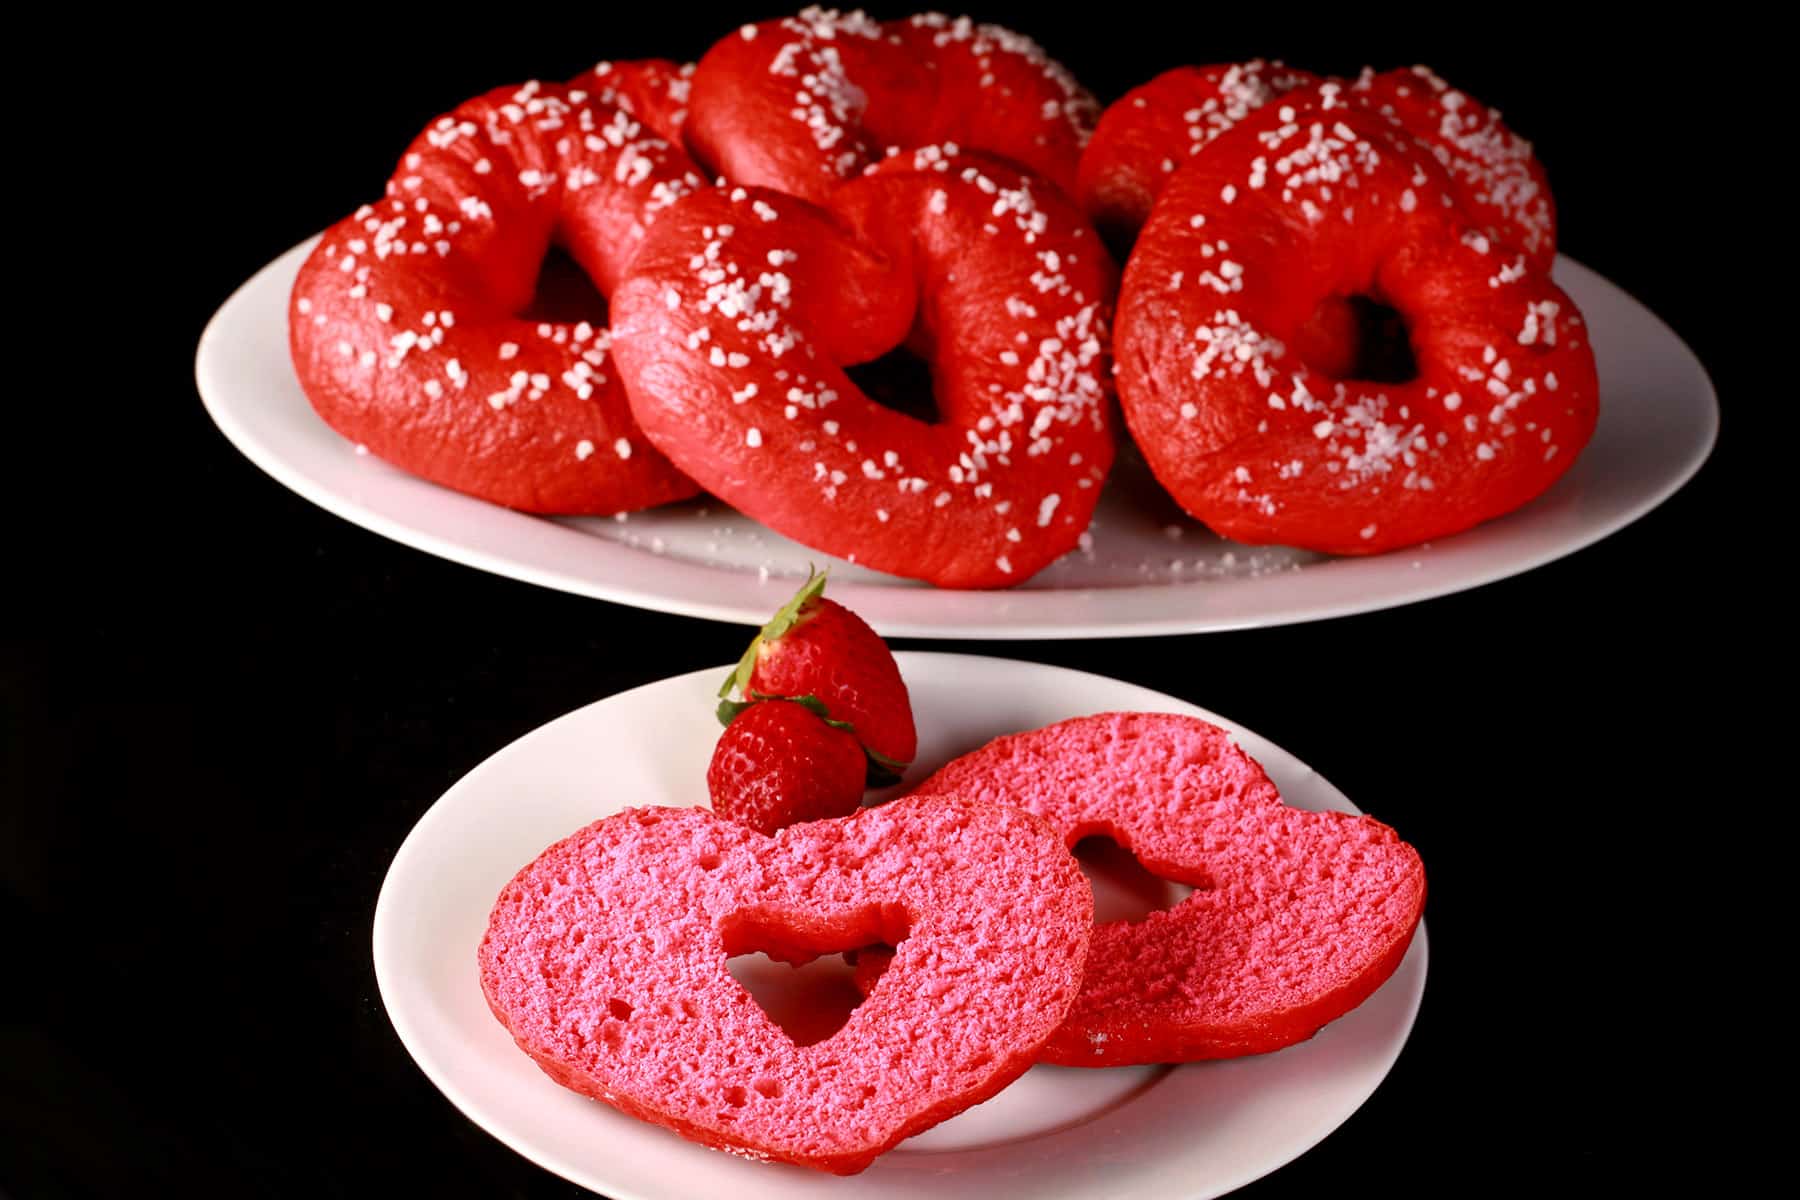 A sliced open pink heart shaped bagel on a plate, with a serving platter of valentine’s day bagels behind it.